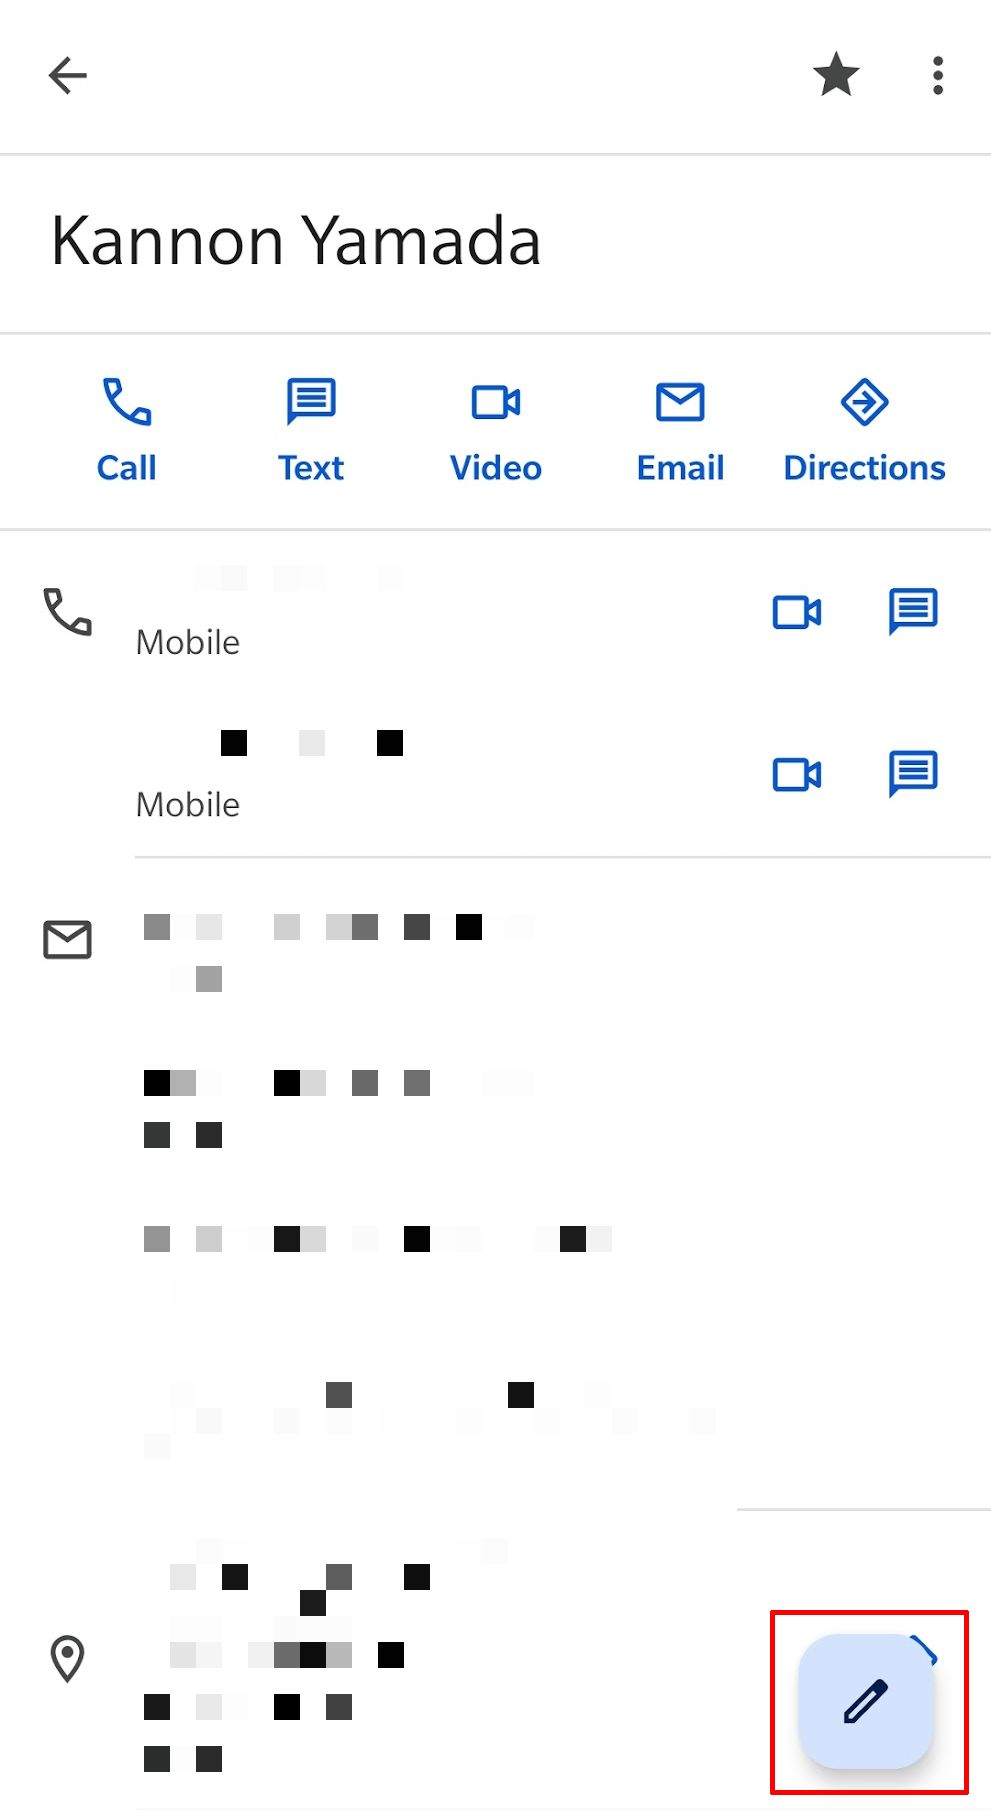 Viewing a contact in the Google Contacts app on Android.